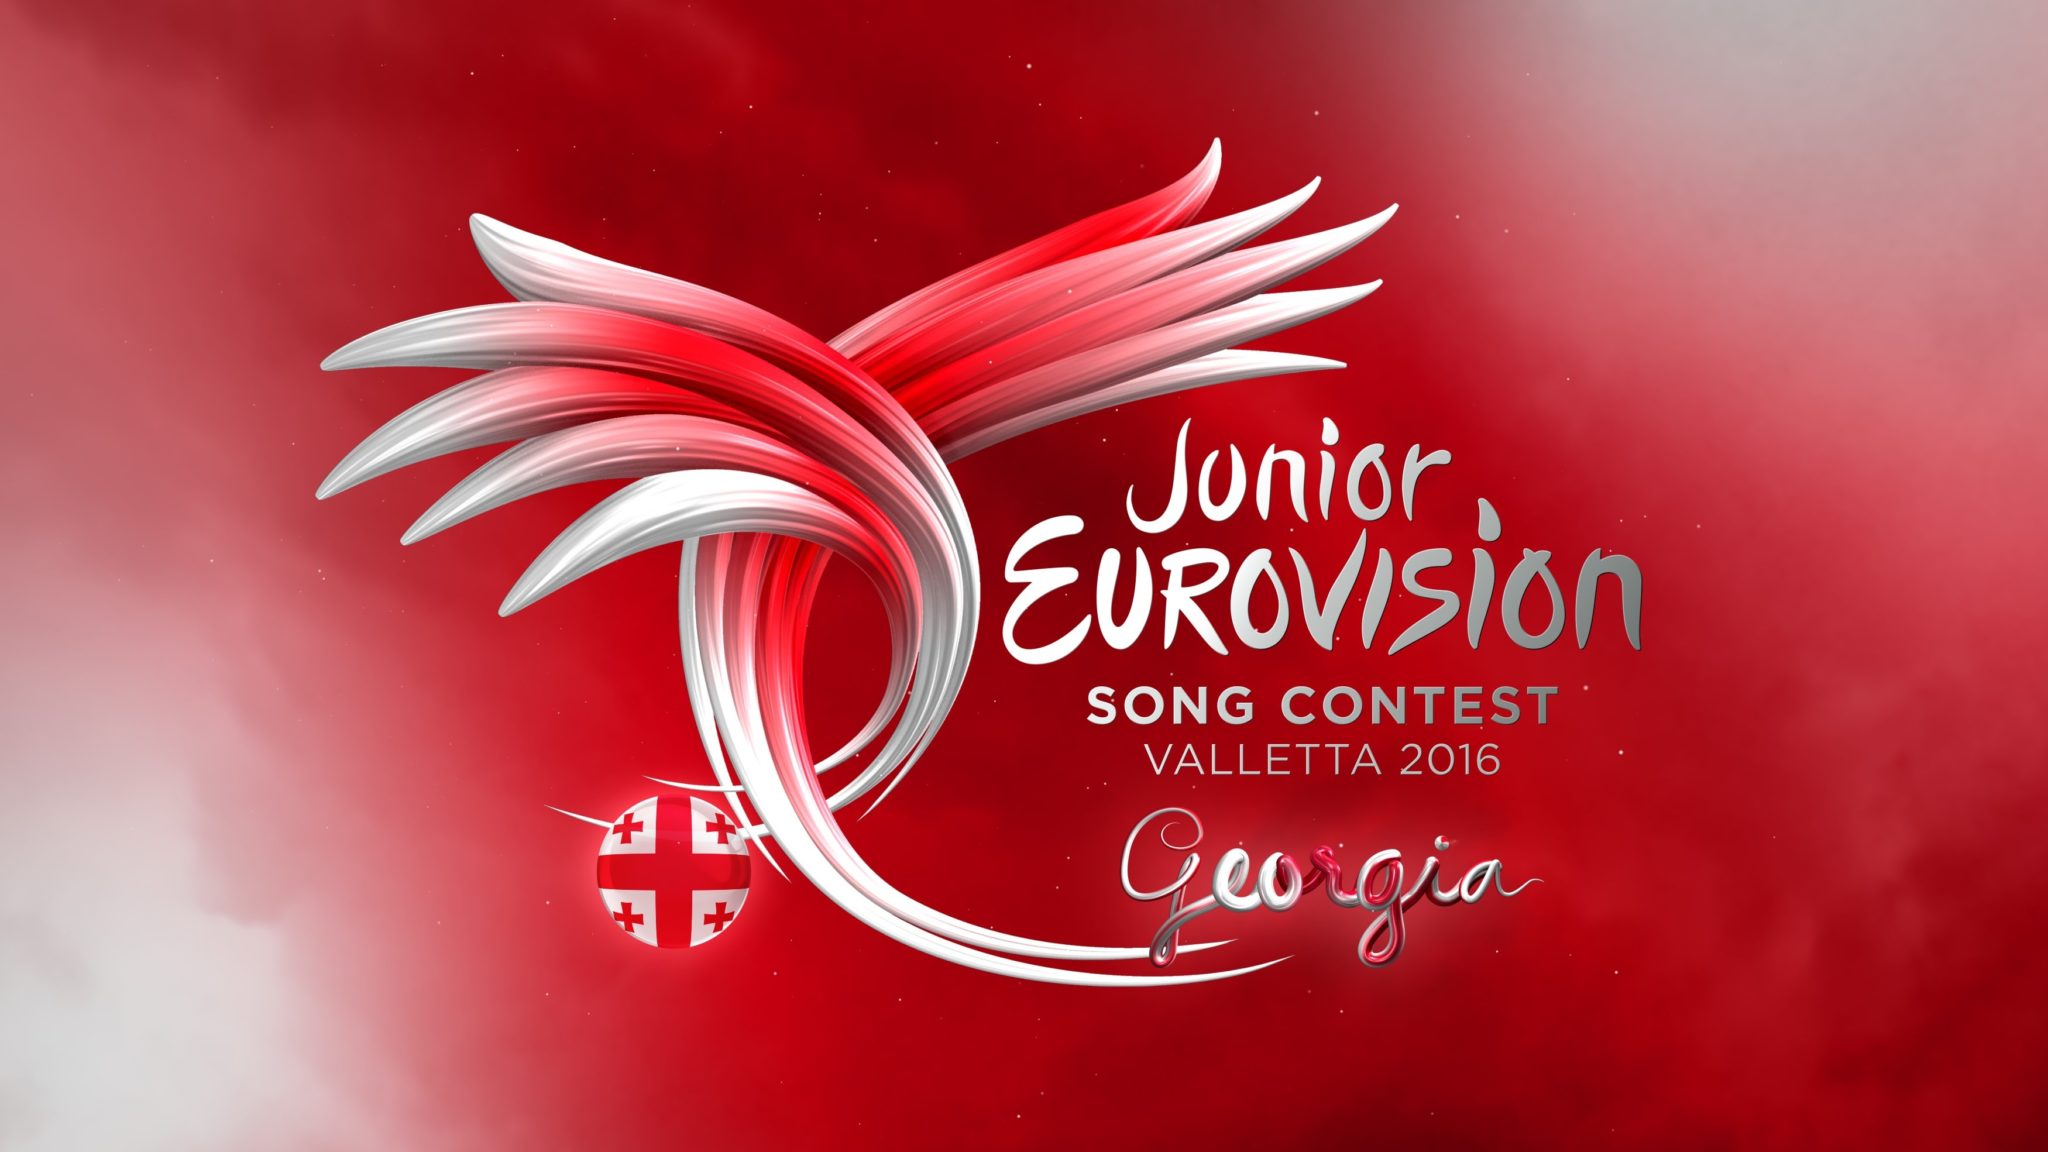 Junior Eurovision: Georgia confirms participation with call for songs